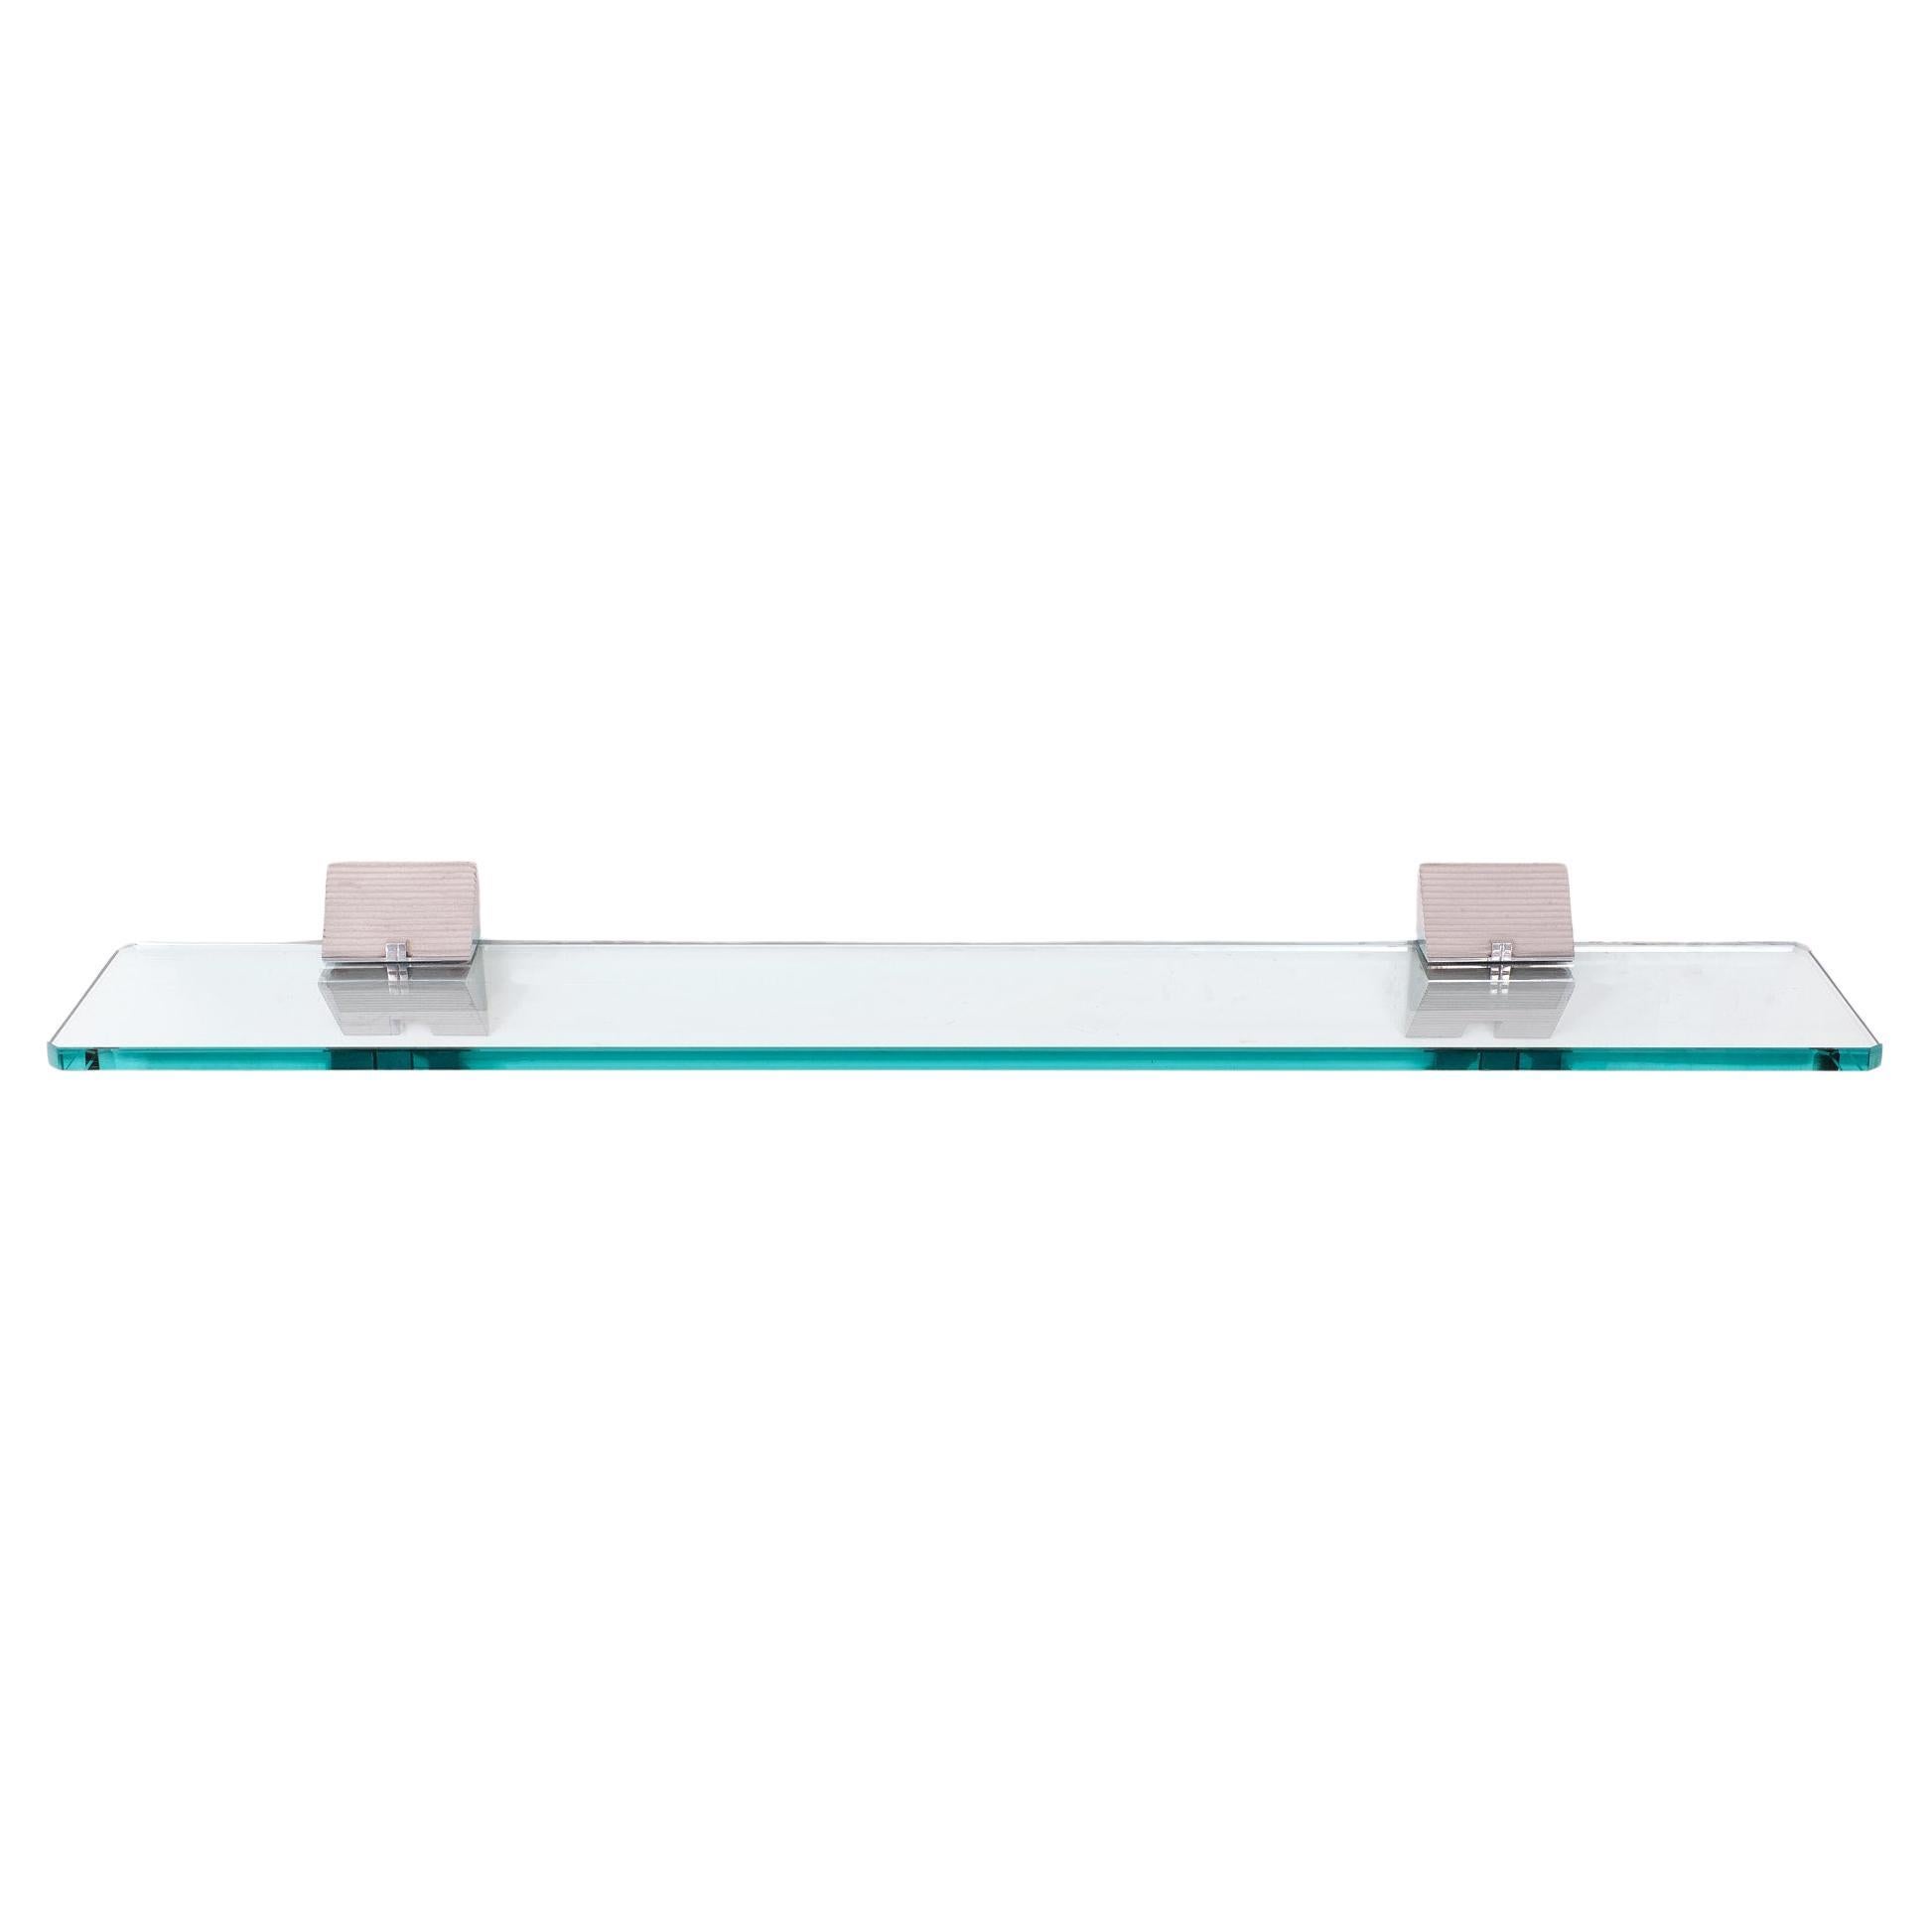 Very nice attractive wall shelve ''Planchet ''. Thick cut Glass shelve .greenish 
in color .holding by polished aluminum brackets .  
Design by Peter Ghyczy  1980s     